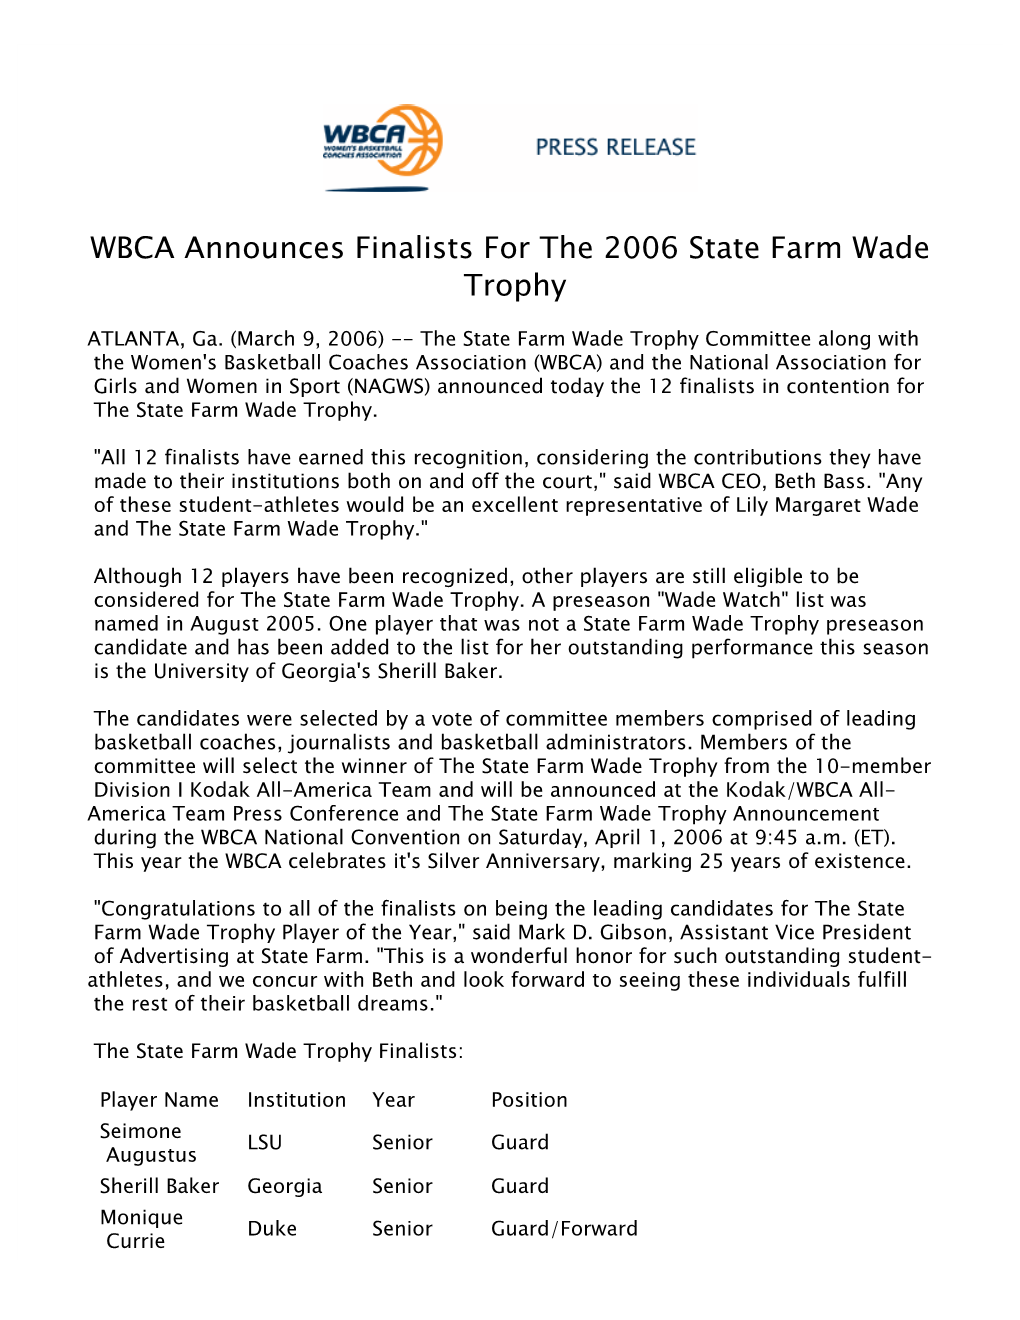 WBCA Announces Finalists for the 2006 State Farm Wade Trophy